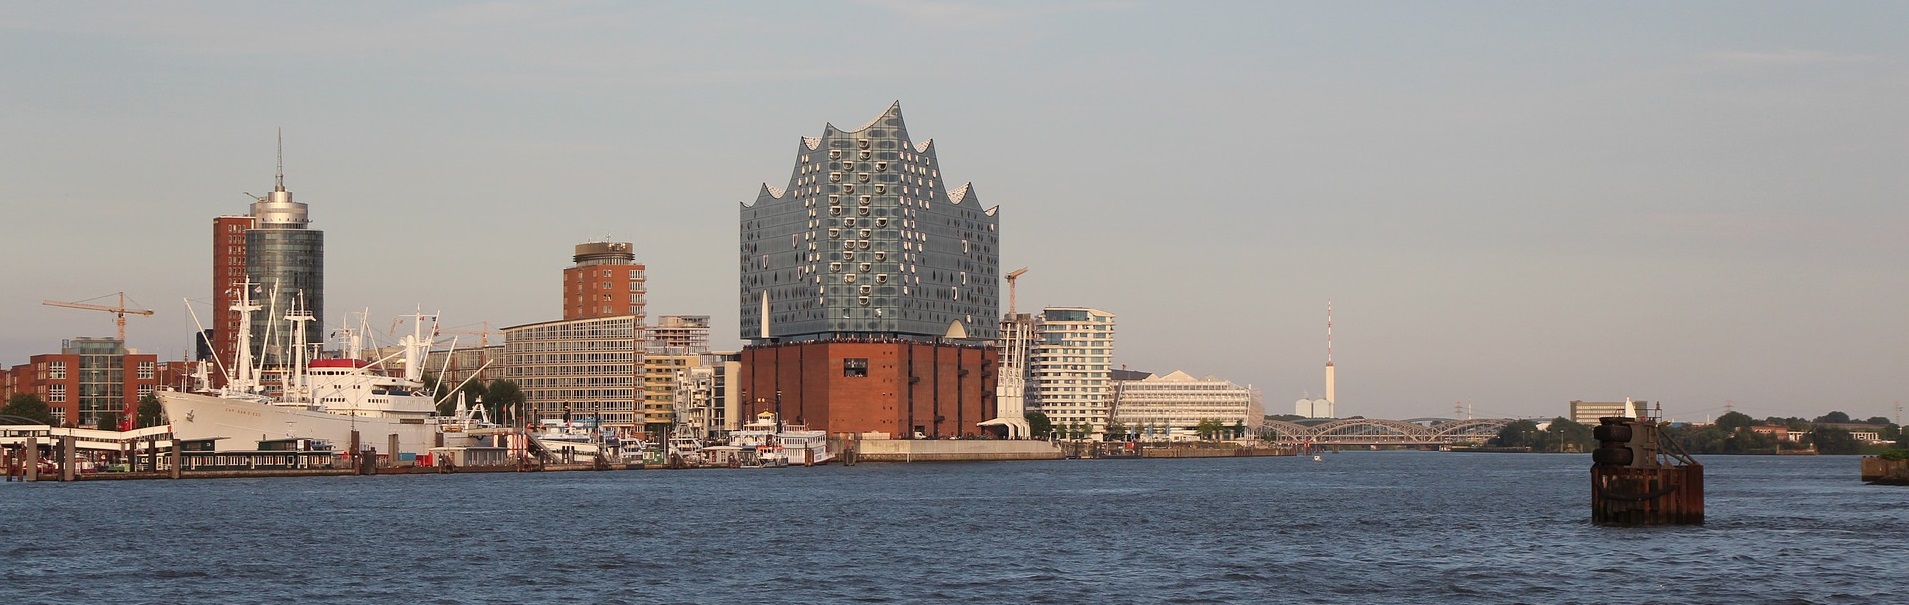 Elbphilharmonie image for Top Things To Do in Hamburg blog